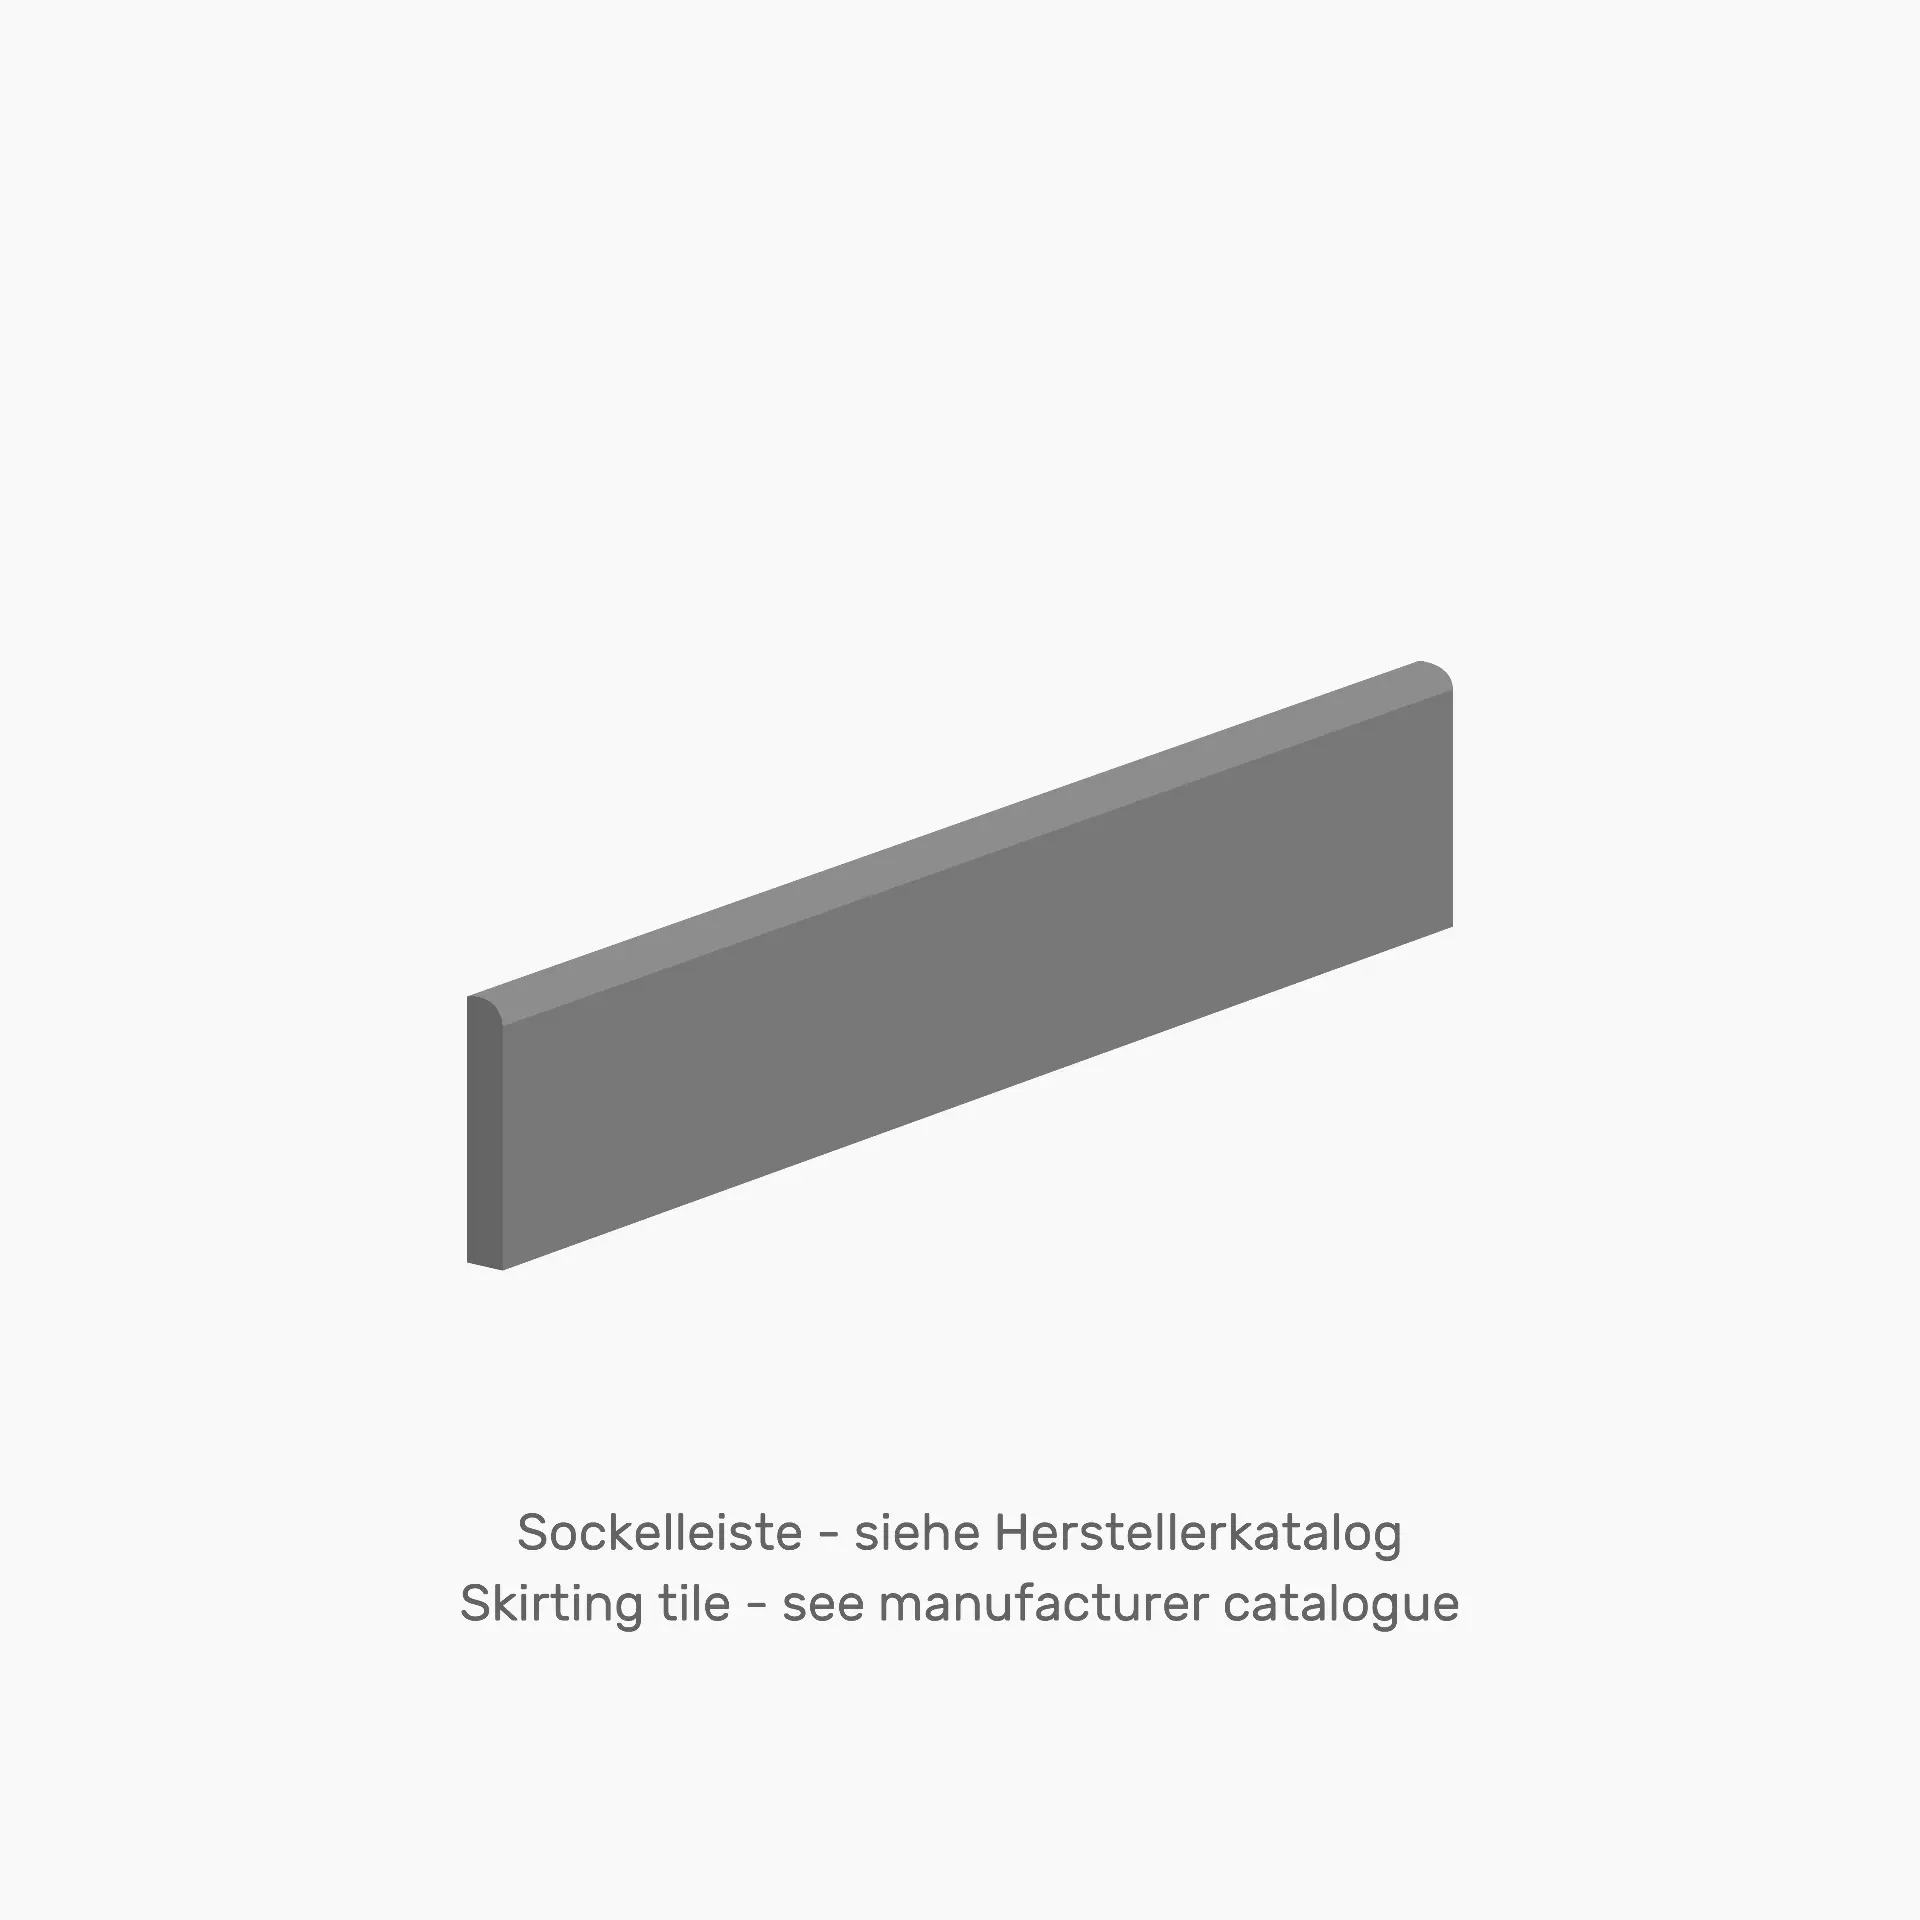 Ergon Playground/Architect Resin Berlin Grey Naturale Skirting board E2A9 7,5x80cm rectified 9,5mm